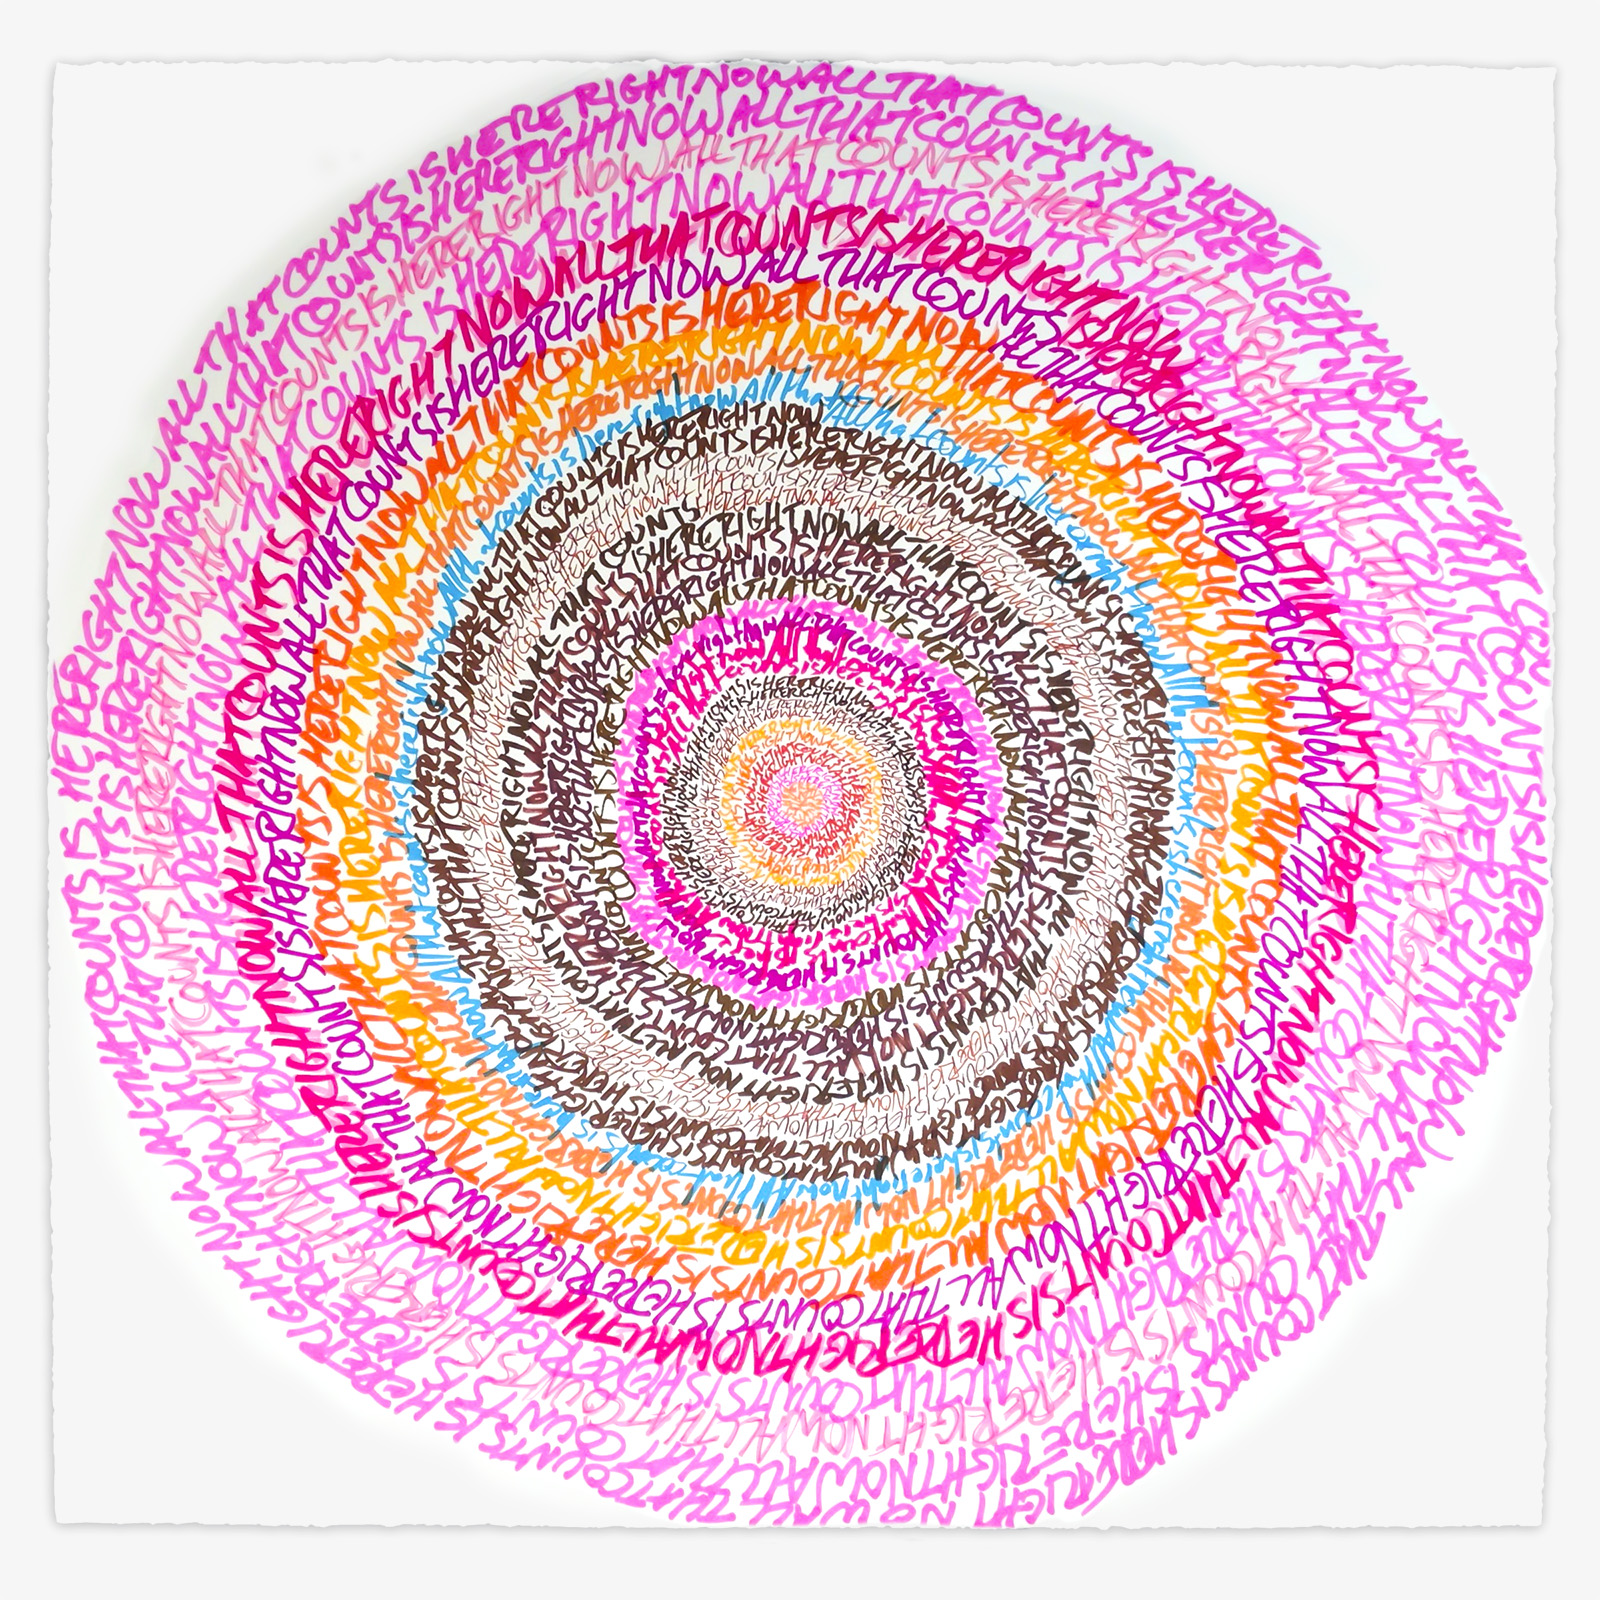 "Energy Spiral—All That Counts Is Here Right Now #2 (Explorers)", 2013, marker and pen on paper, 17.25 in. x 17.25 in.